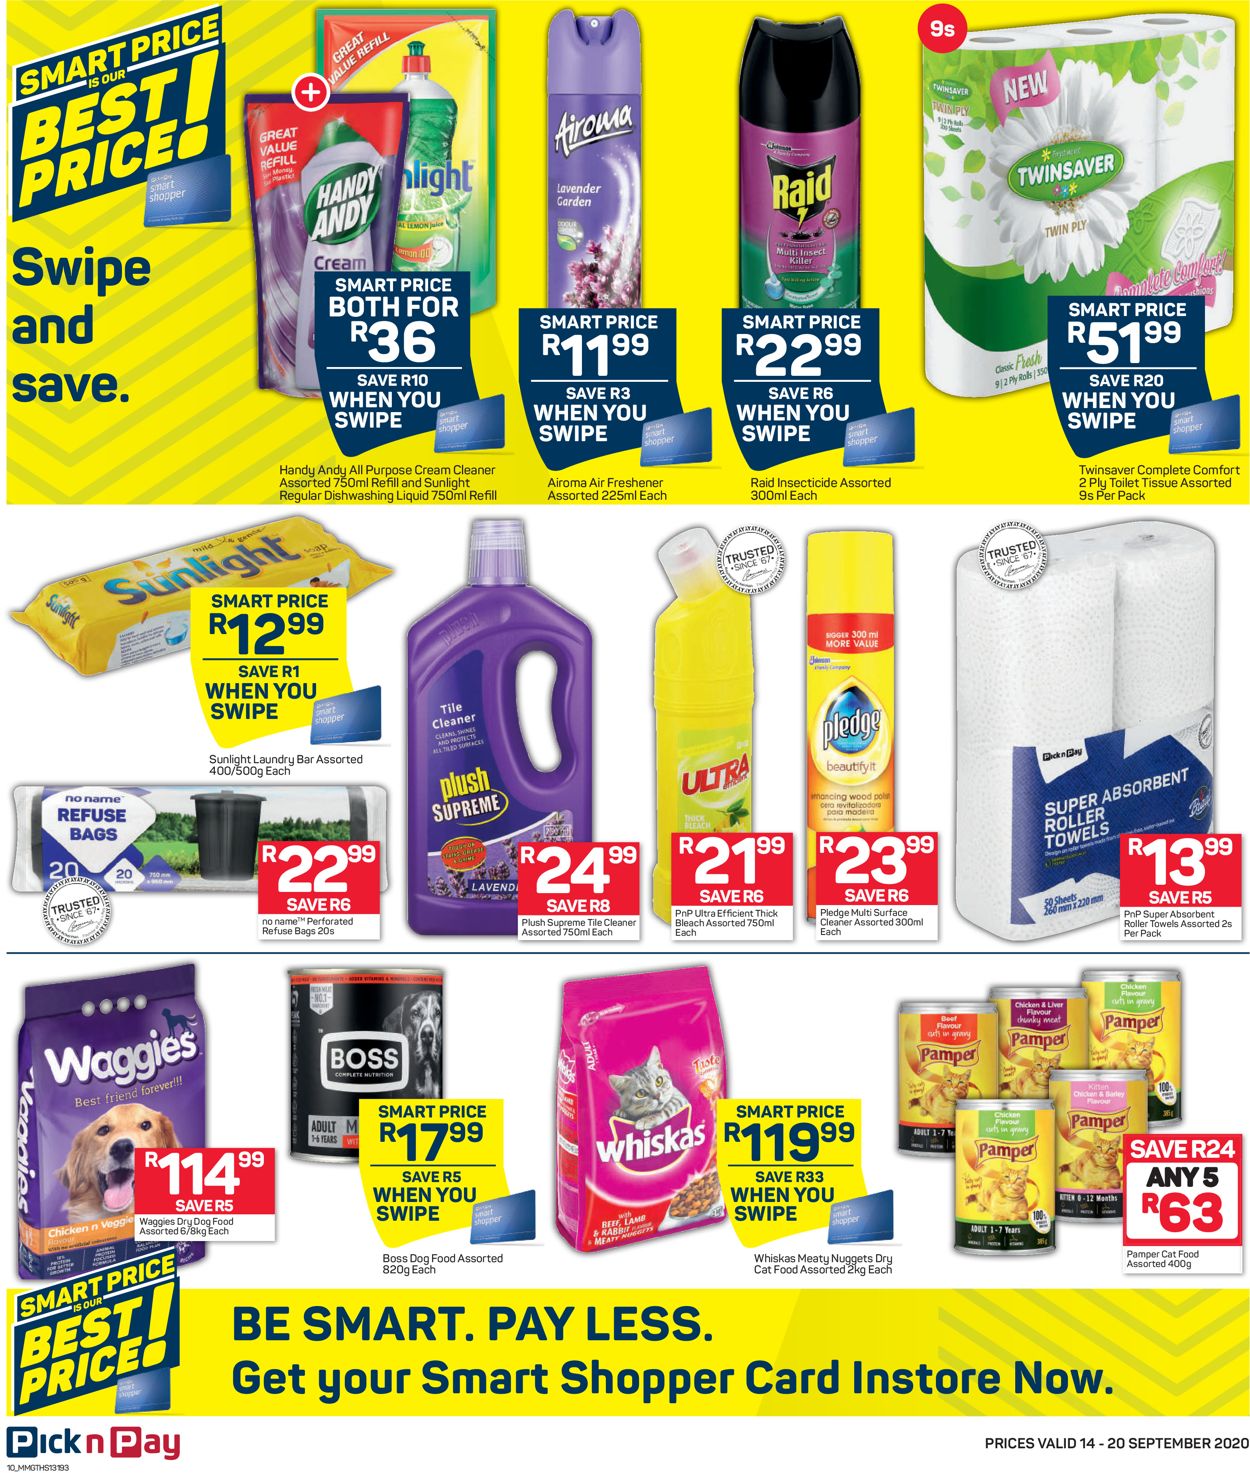 Pick n Pay Catalogue - 2020/09/14-2020/09/20 (Page 10)